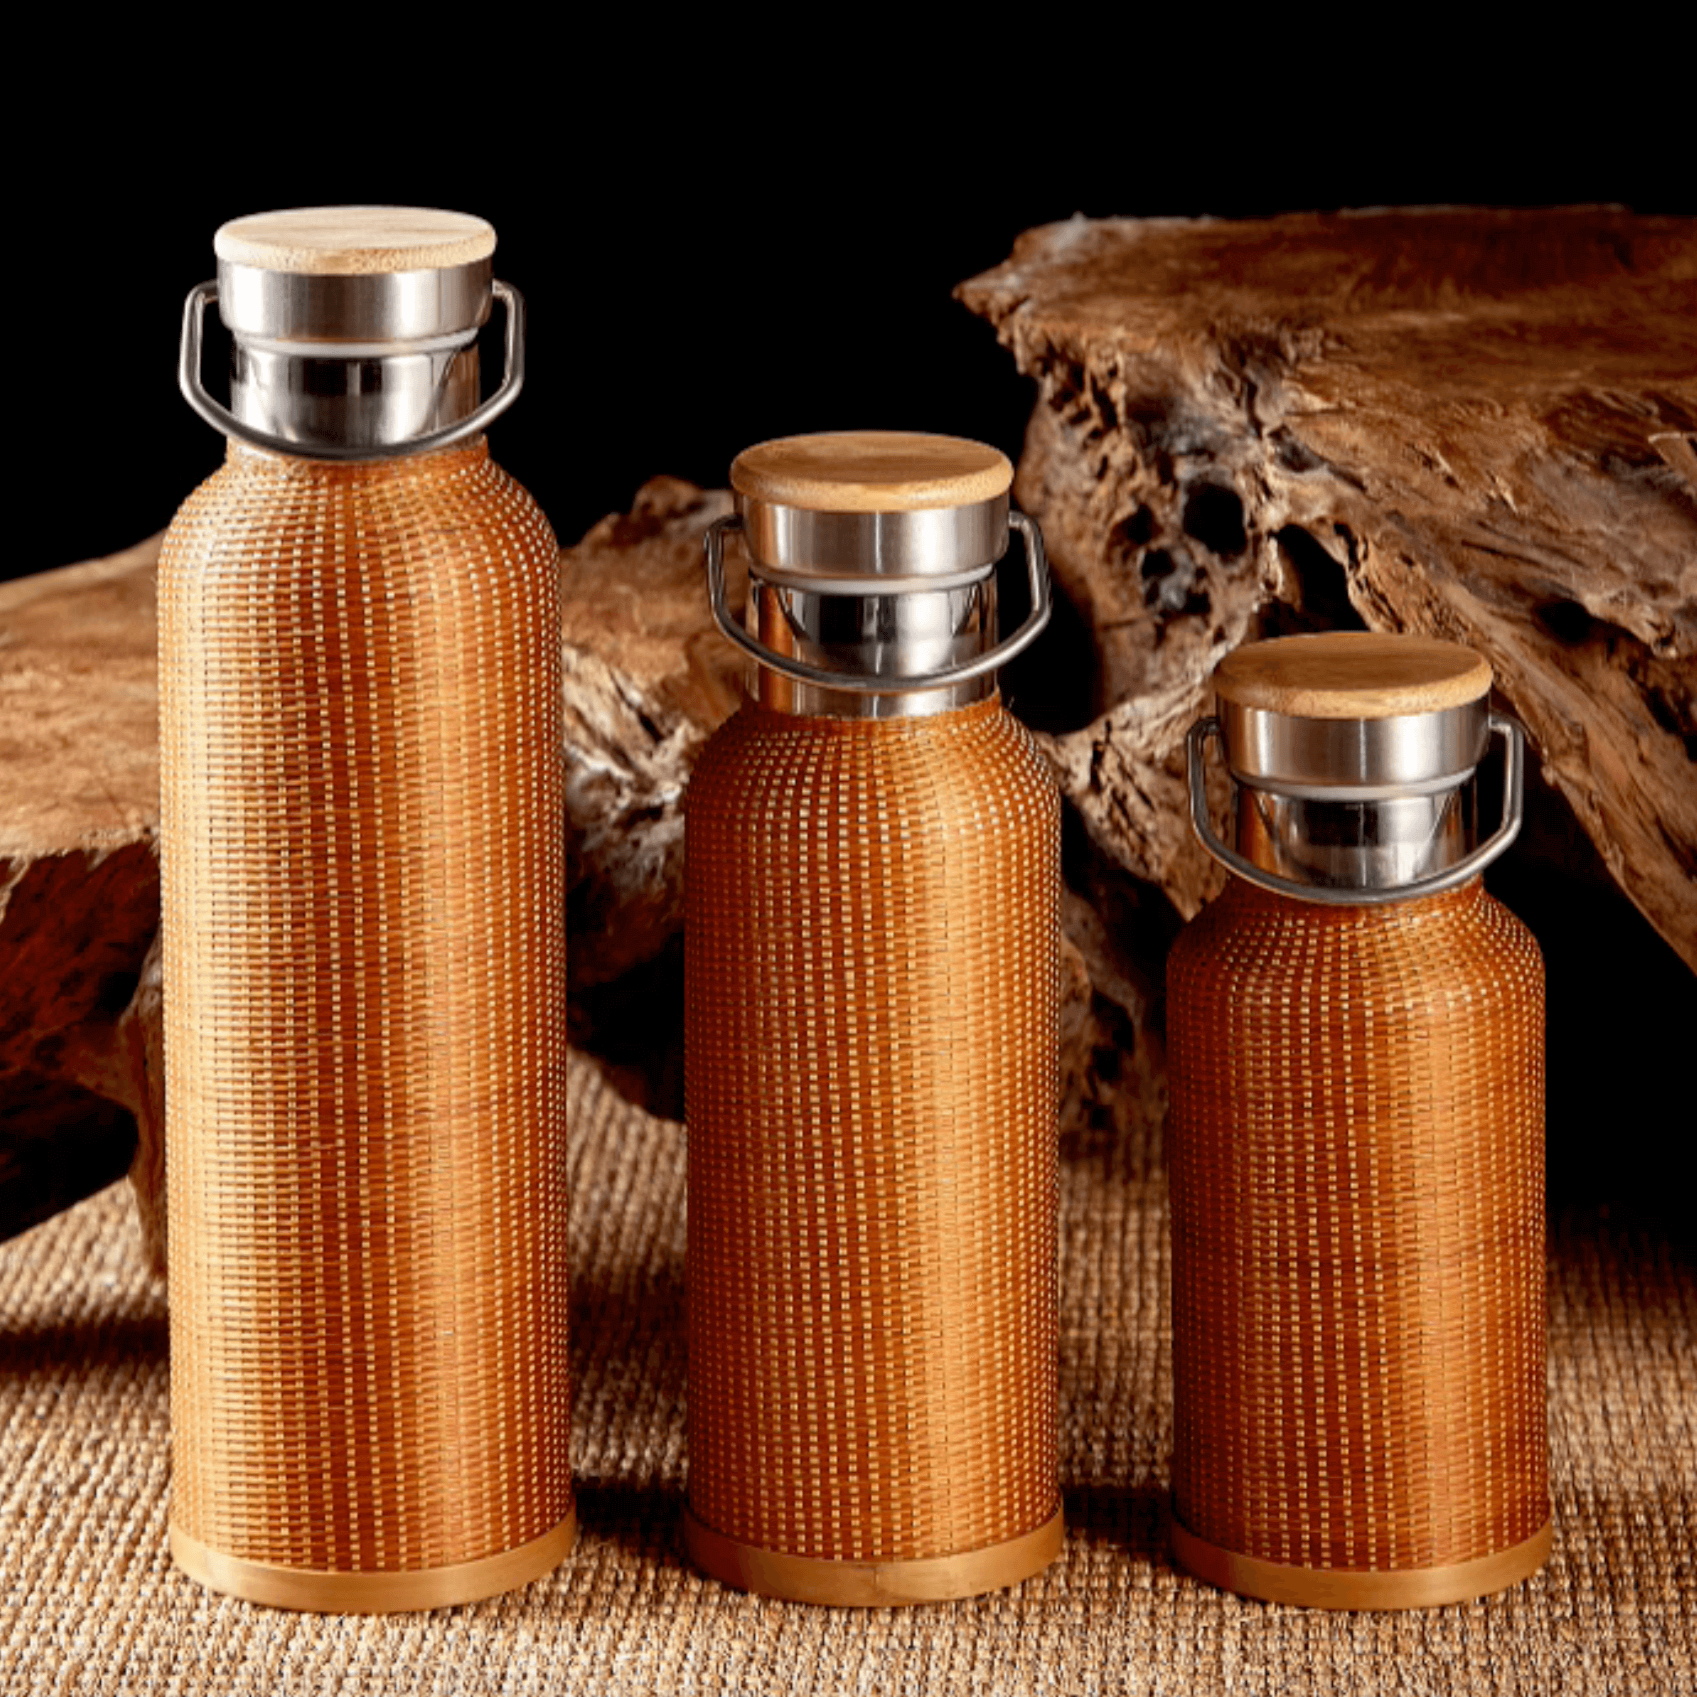 Chinese bamboo-woven insulated water bottles 350-750ml100% handmade traditional Chinese bamboo woven water bottle. Unique design, and is easy to carry. Make you love drinking water!